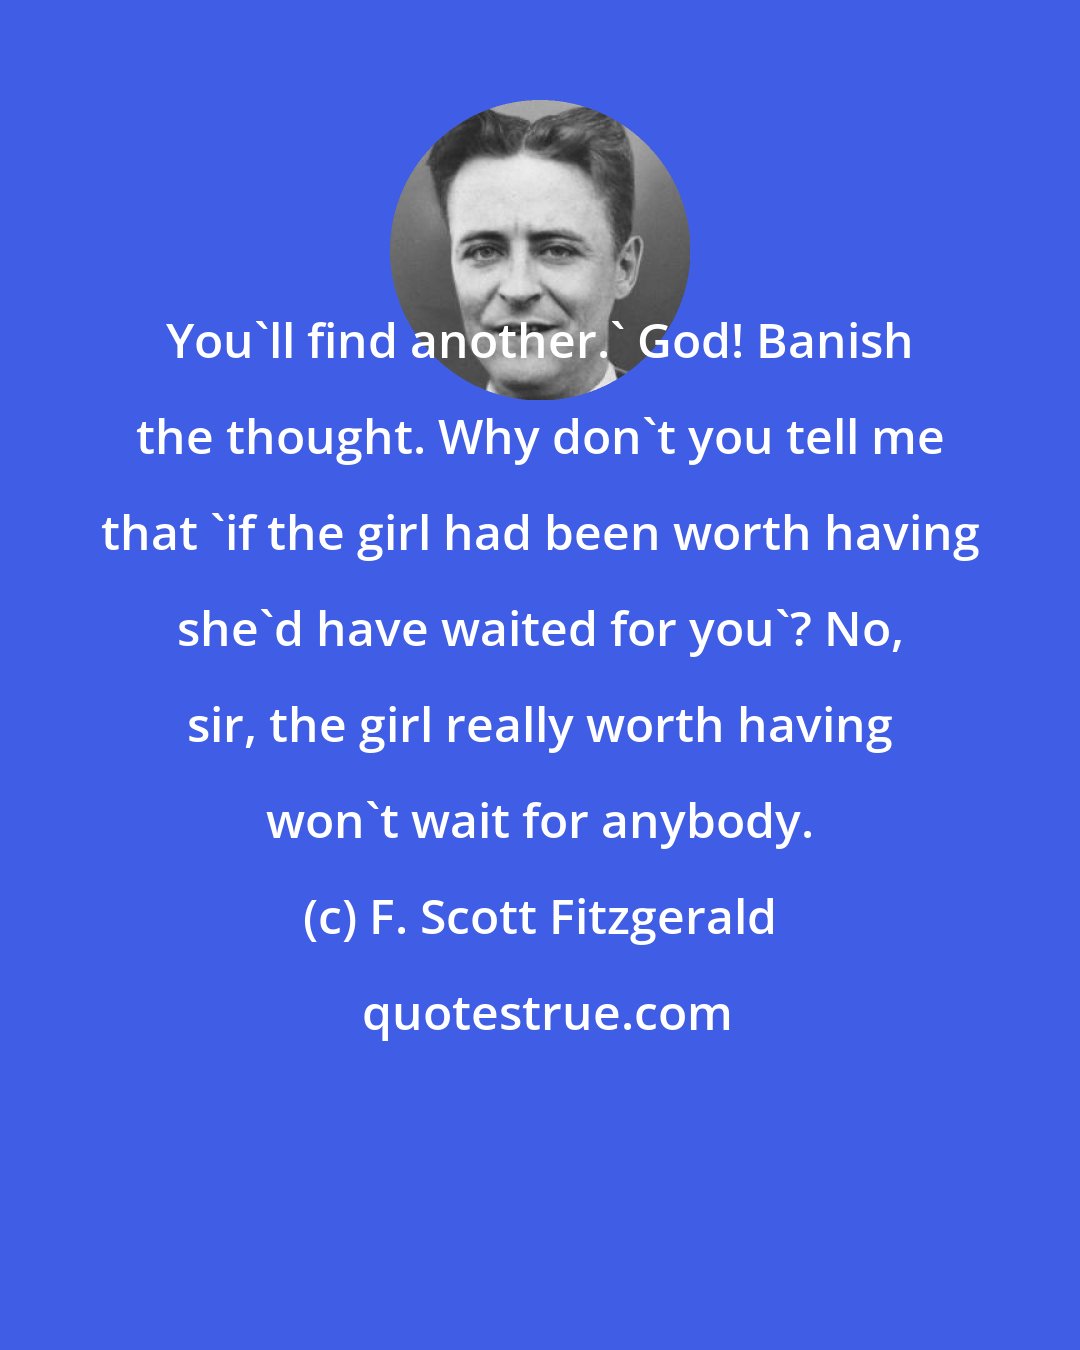 F. Scott Fitzgerald: You'll find another.' God! Banish the thought. Why don't you tell me that 'if the girl had been worth having she'd have waited for you'? No, sir, the girl really worth having won't wait for anybody.